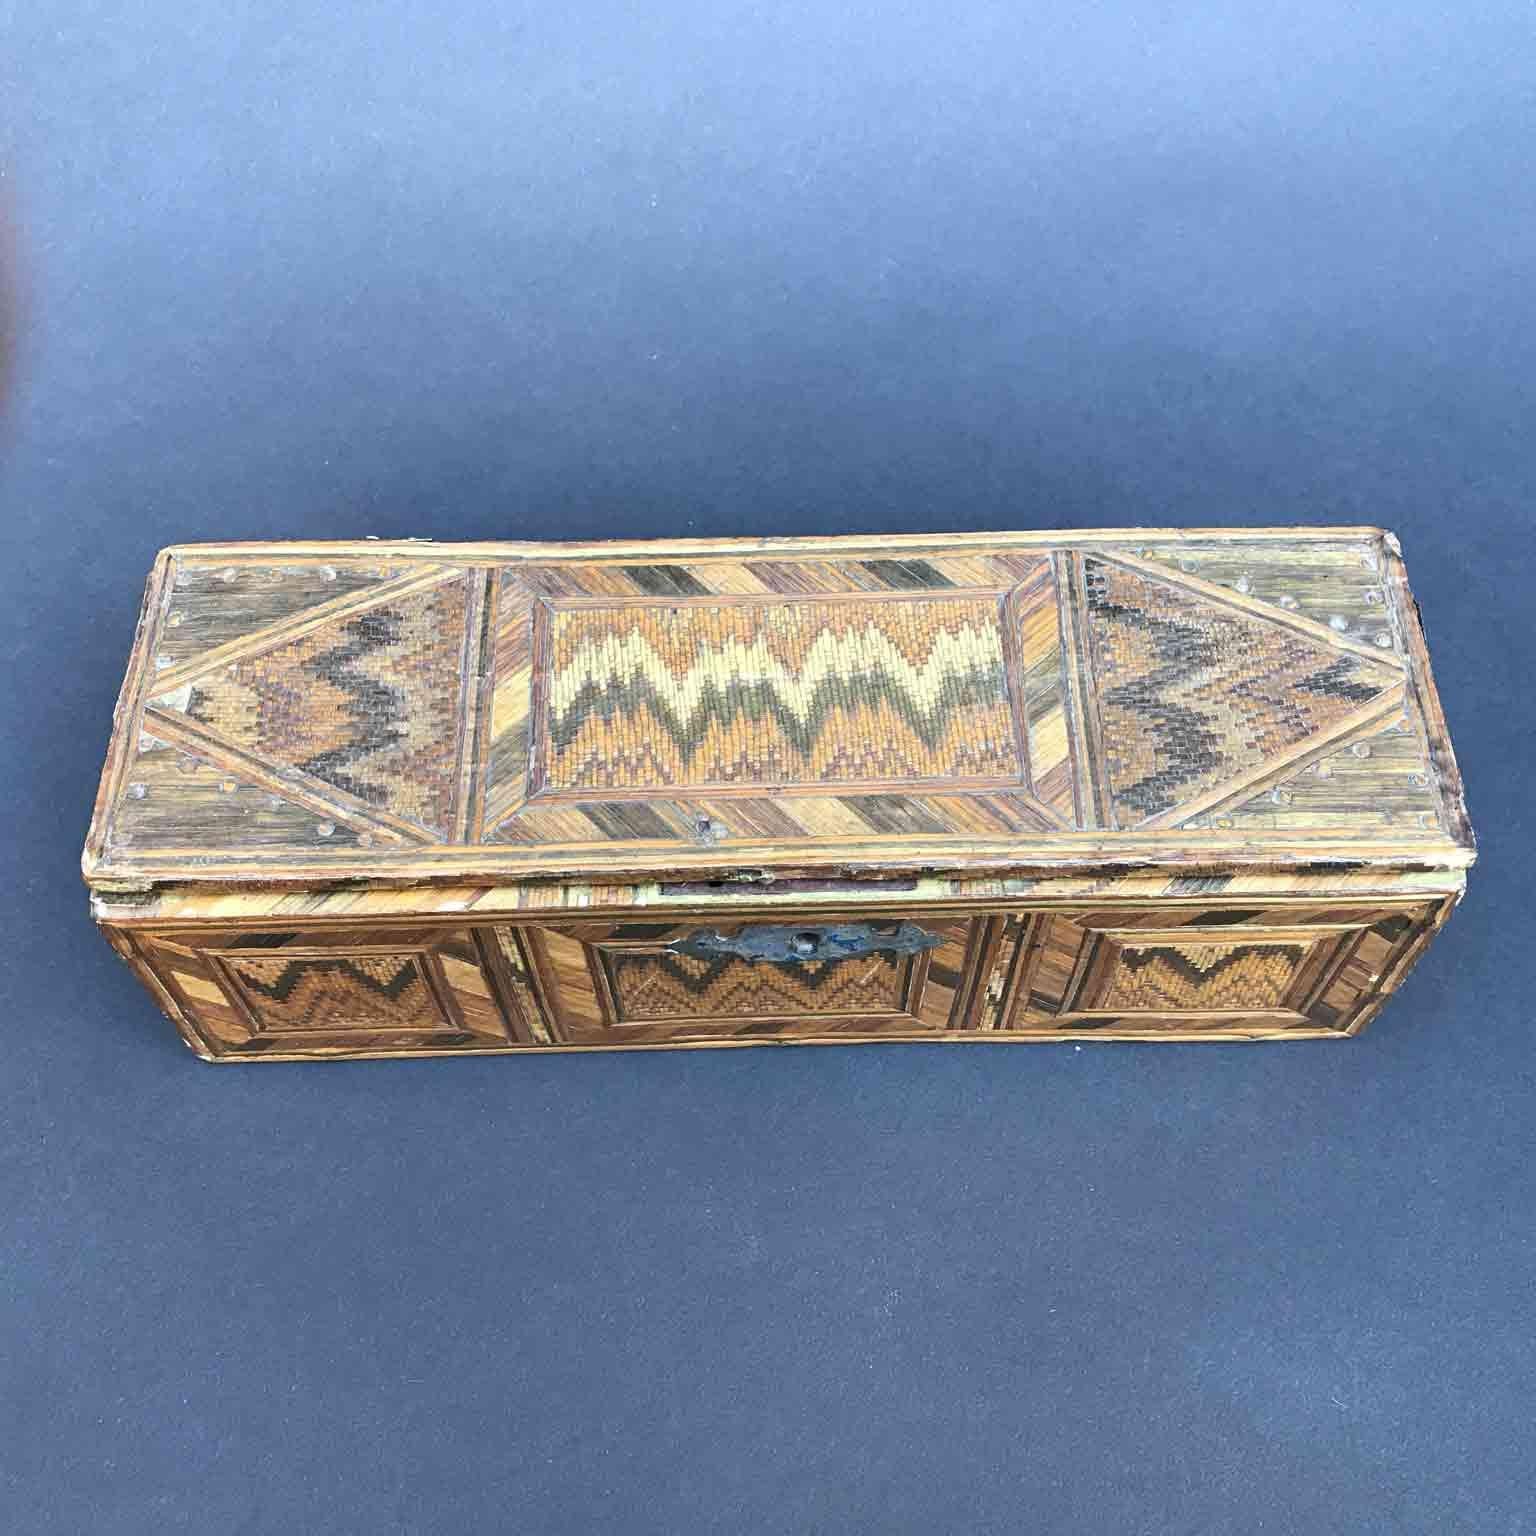 Italian 19th Century Braided Straw Box from a Monastery in Umbria Region For Sale 1